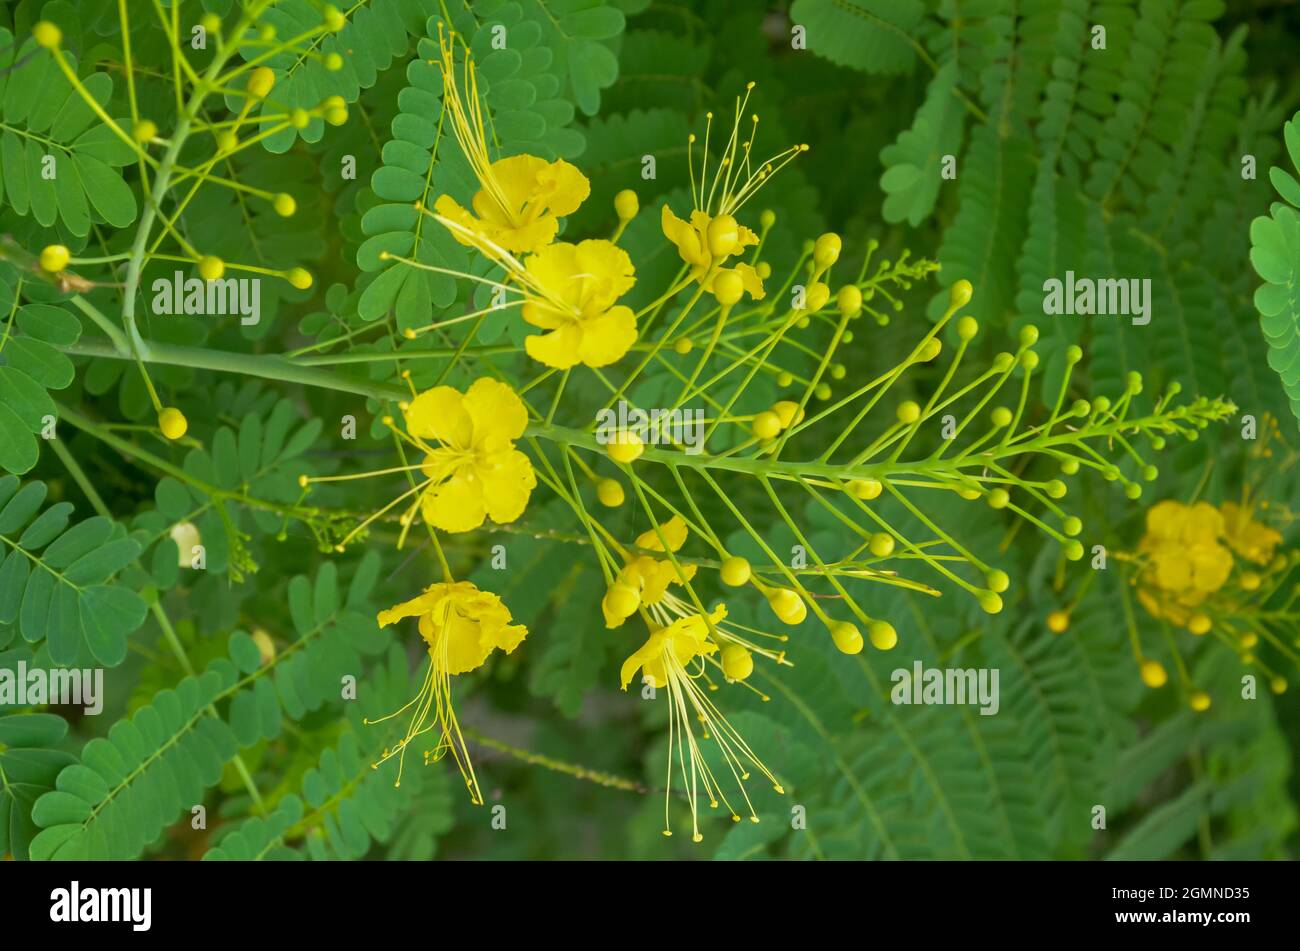 YELLOW PEACOCK FLOWER WITH GREEN LEAVES. Stock Photo